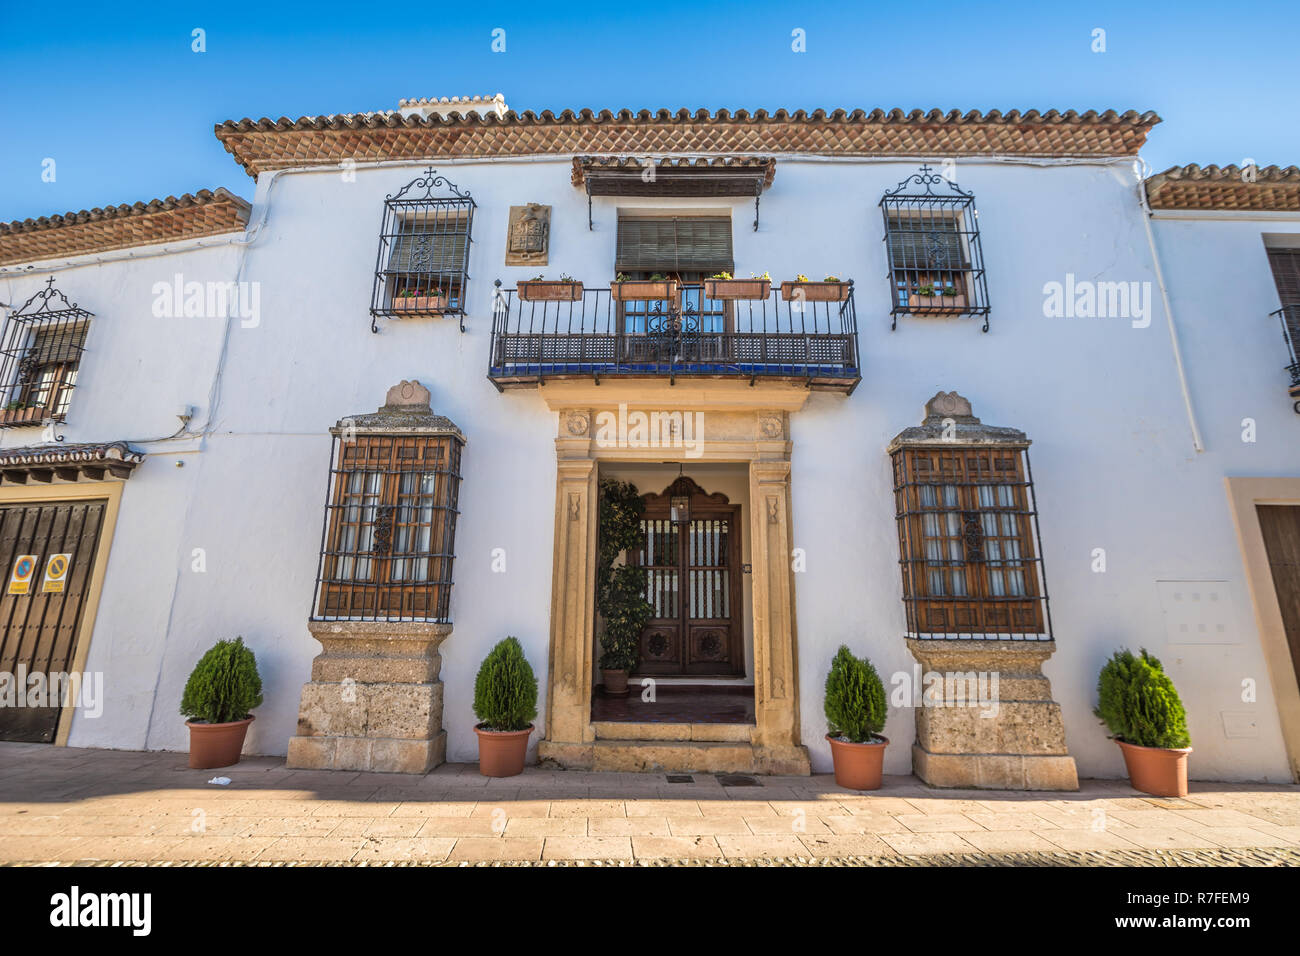 Typical house in Ronda Spain Stock Photo